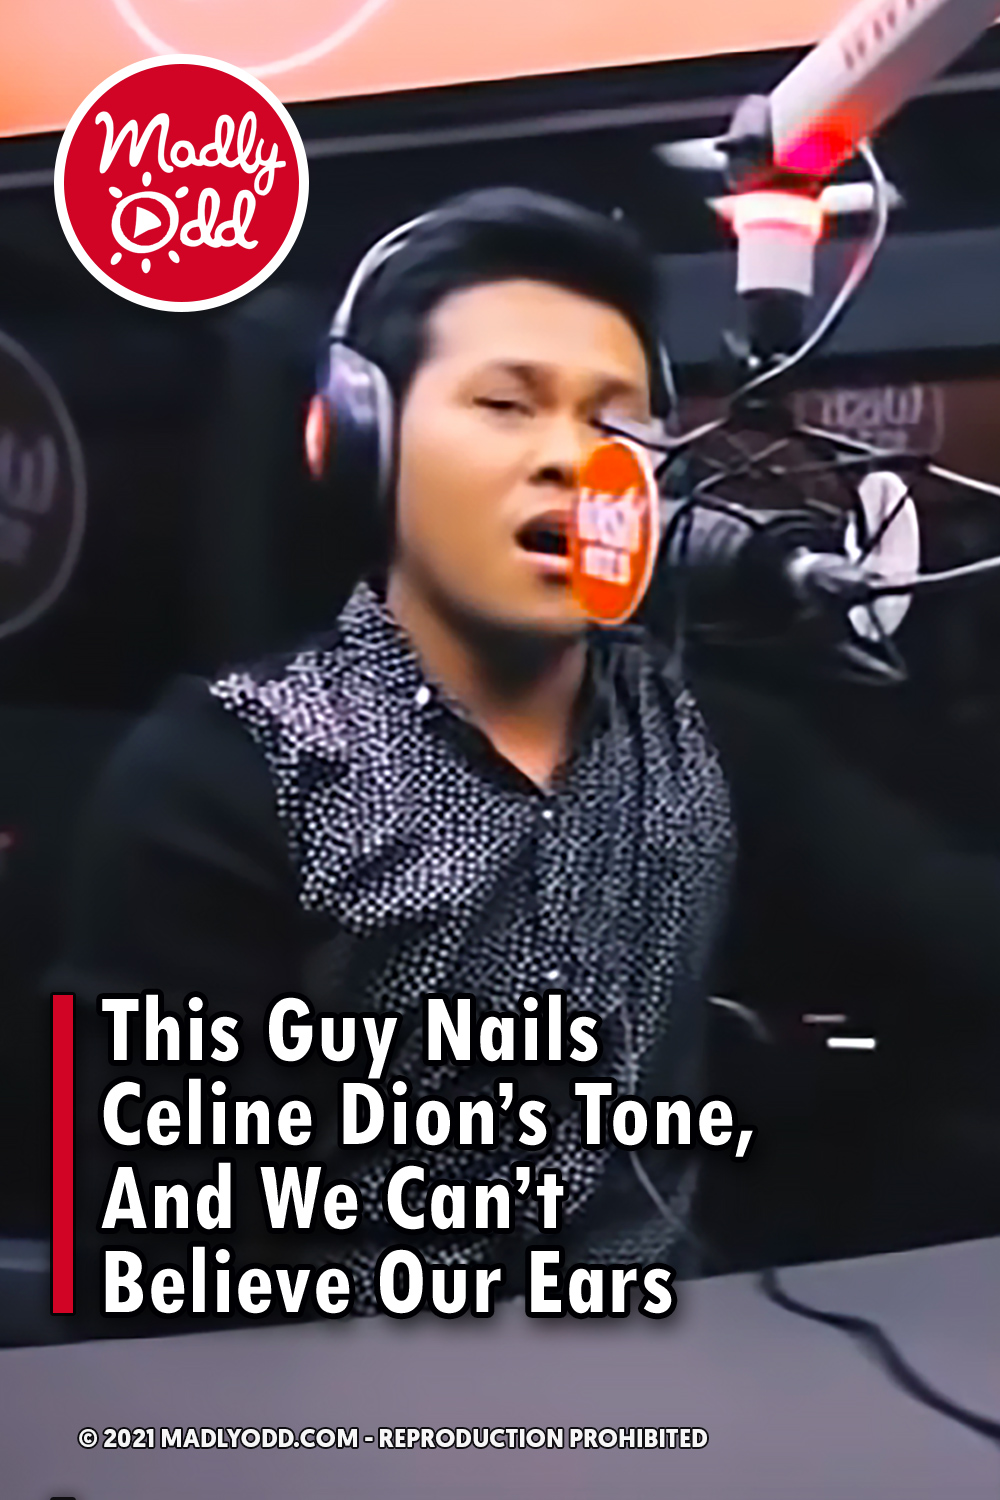 This Guy Nails Celine Dion’s Tone, And We Can’t Believe Our Ears